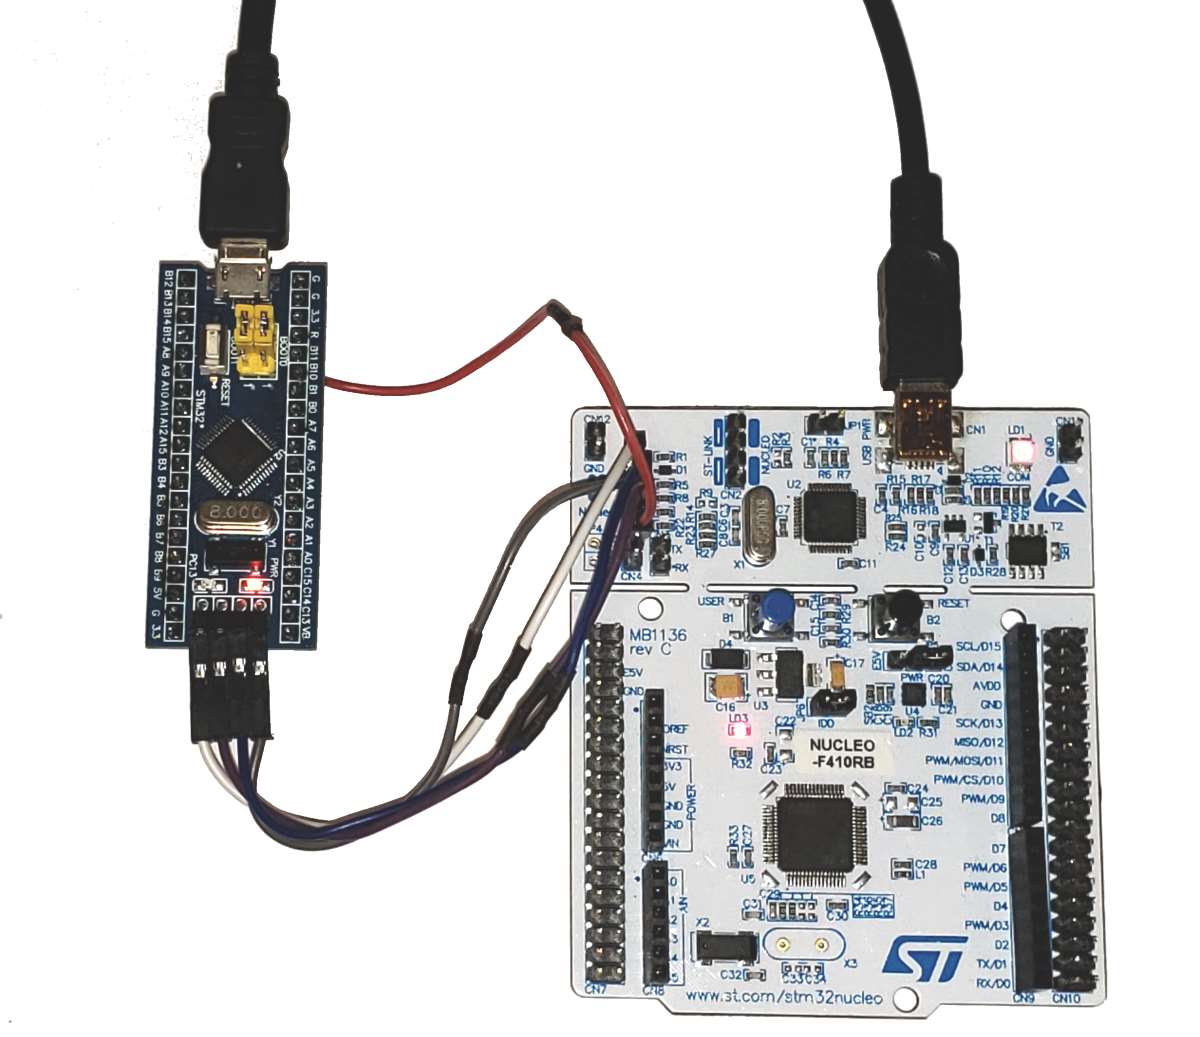 Introduction to the STM32 Blue Pill (STM32duino)